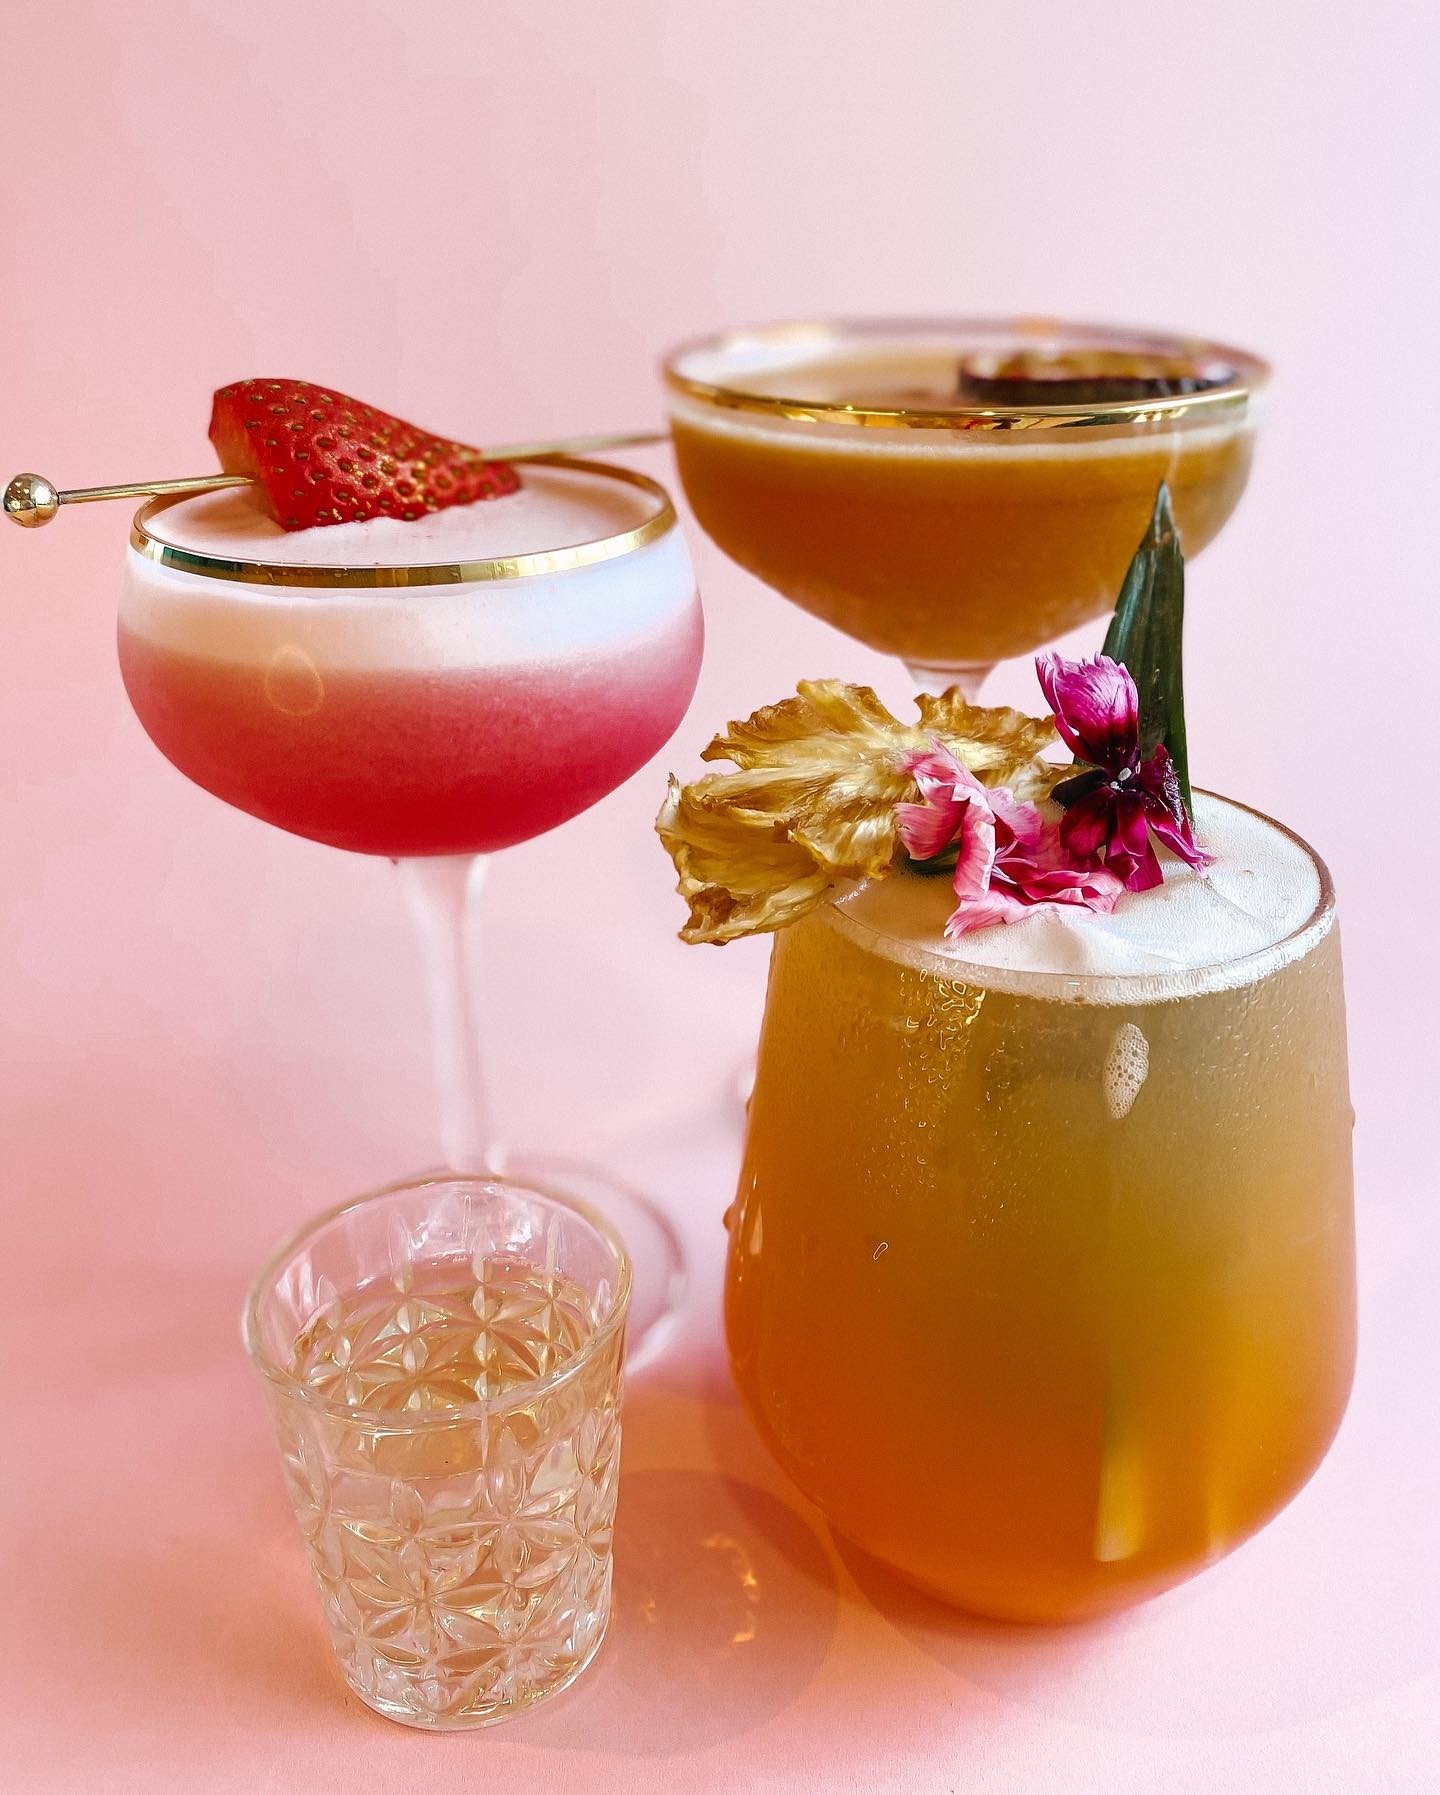 An example of the cocktails served in the evening Picture: Lawrences Bakery & Bar/Facebook